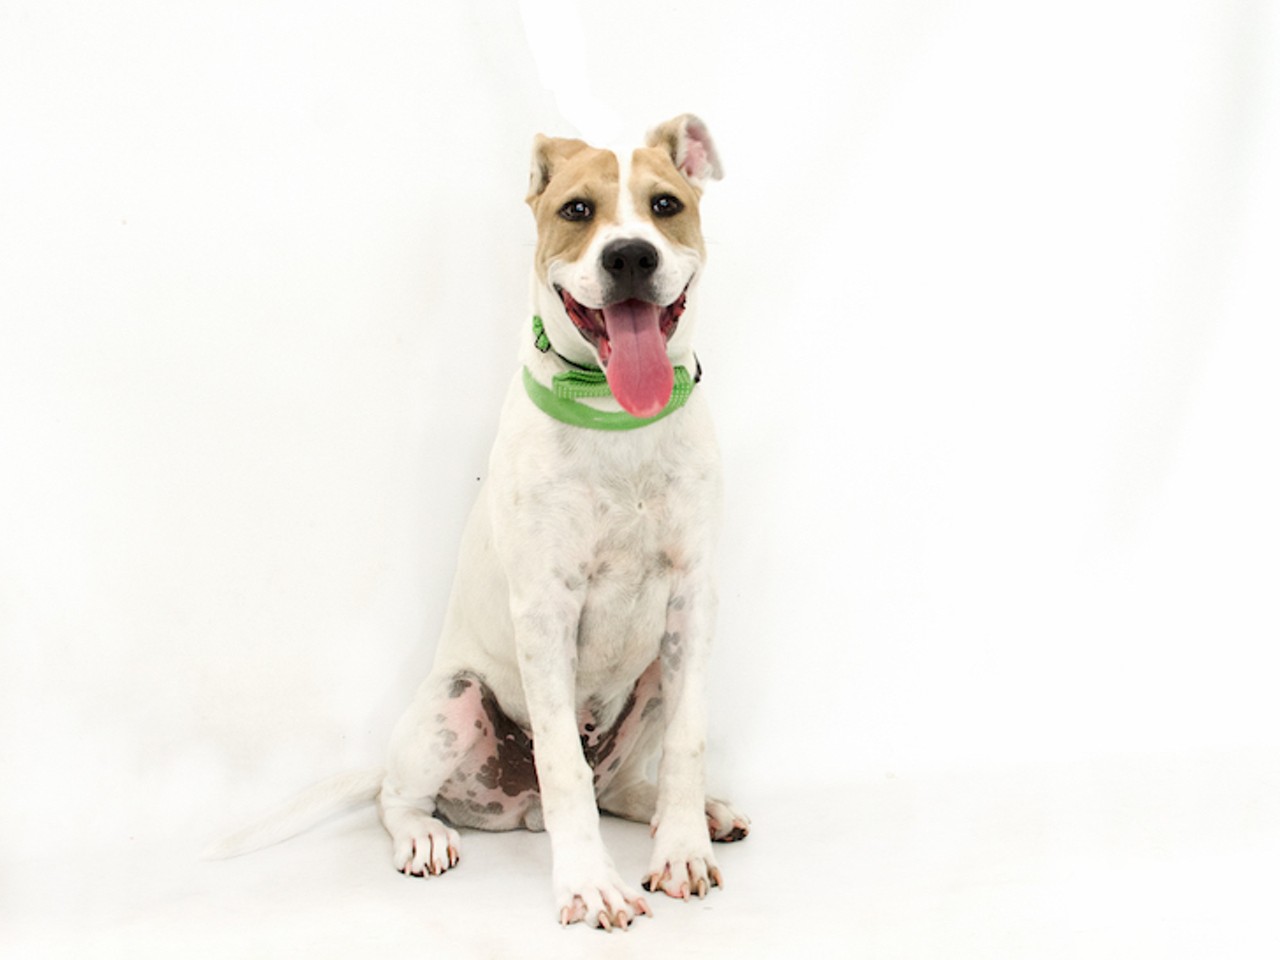 18 adoptable doggos available right now at Orange County Animal Services